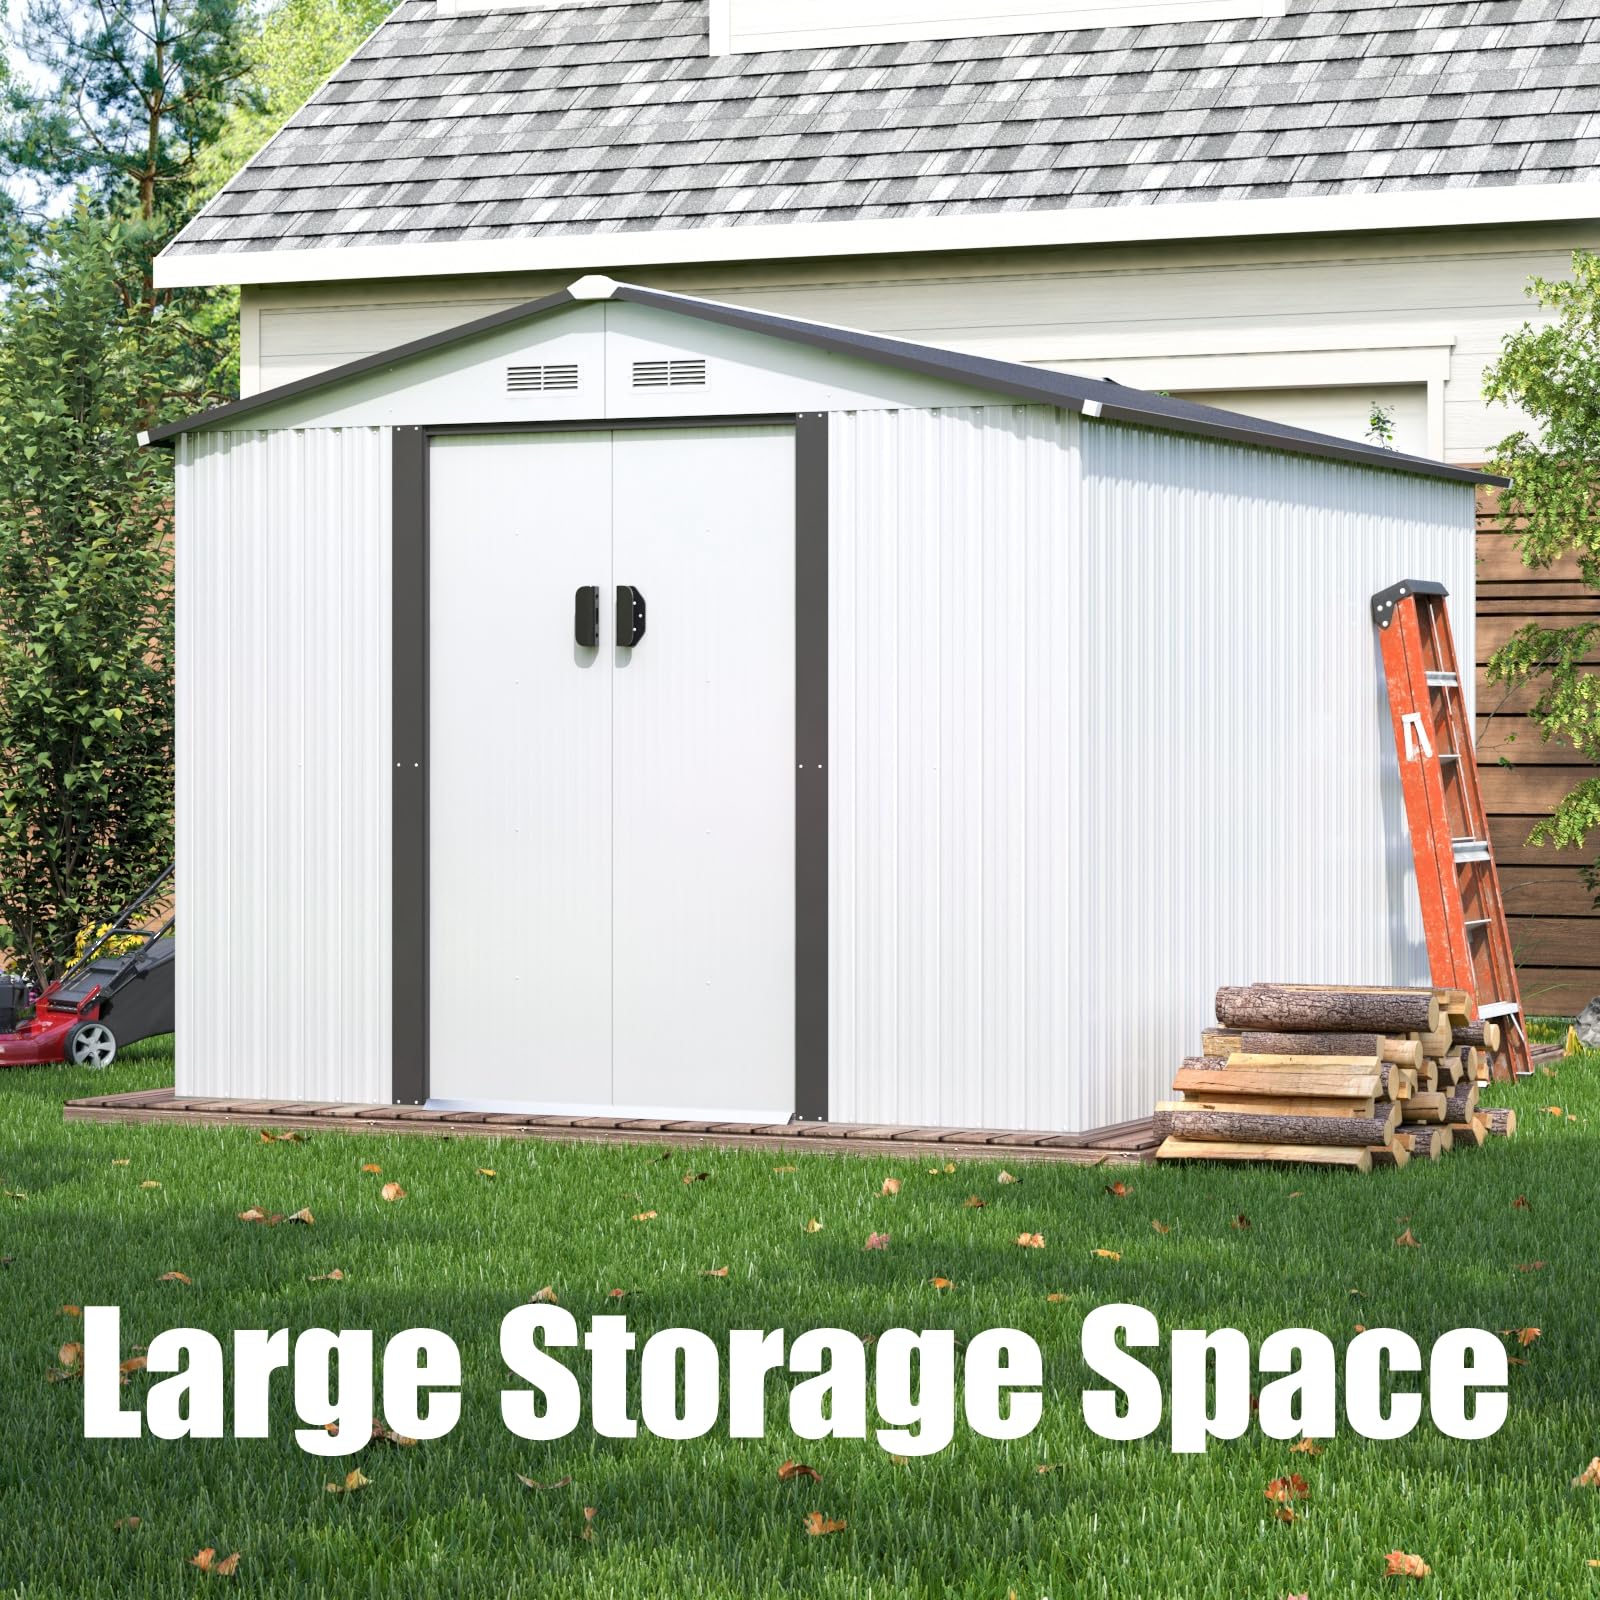 

8' X 8' Outdoor Storage Shed Metal Garden Sheds With Sliding Doors For Backyard, Patio, Lawn